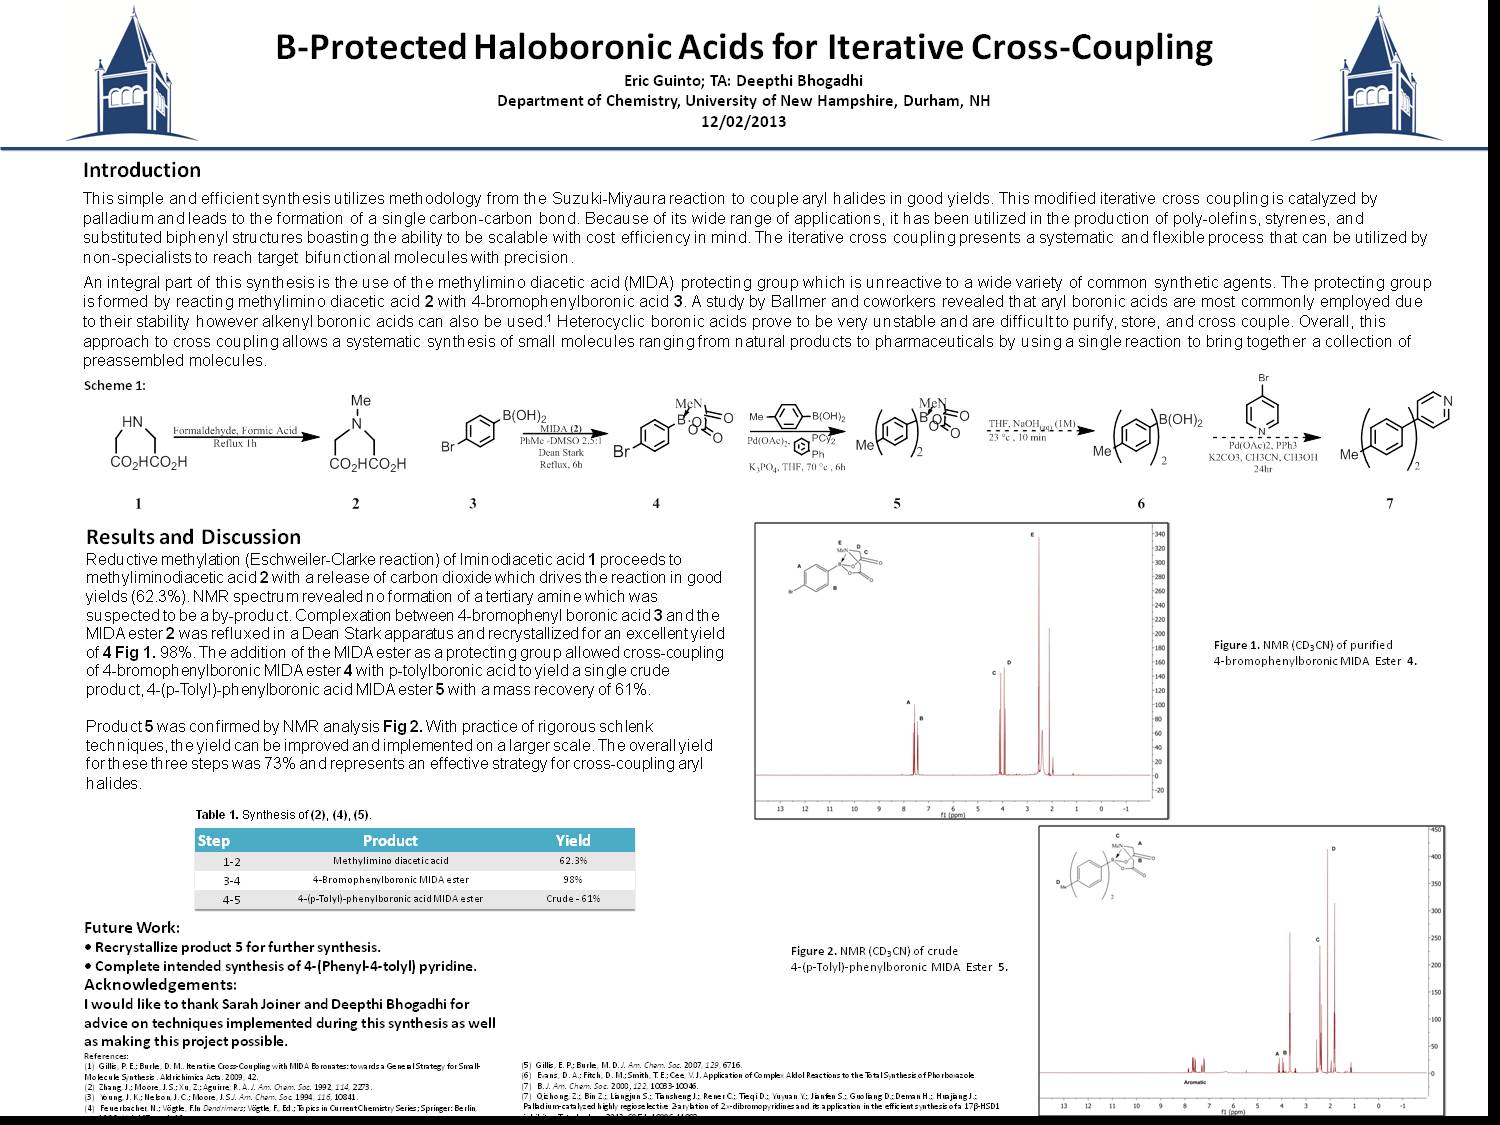 B-Protected Haloboronic Acids For Iterative Cross-Coupling by eav66